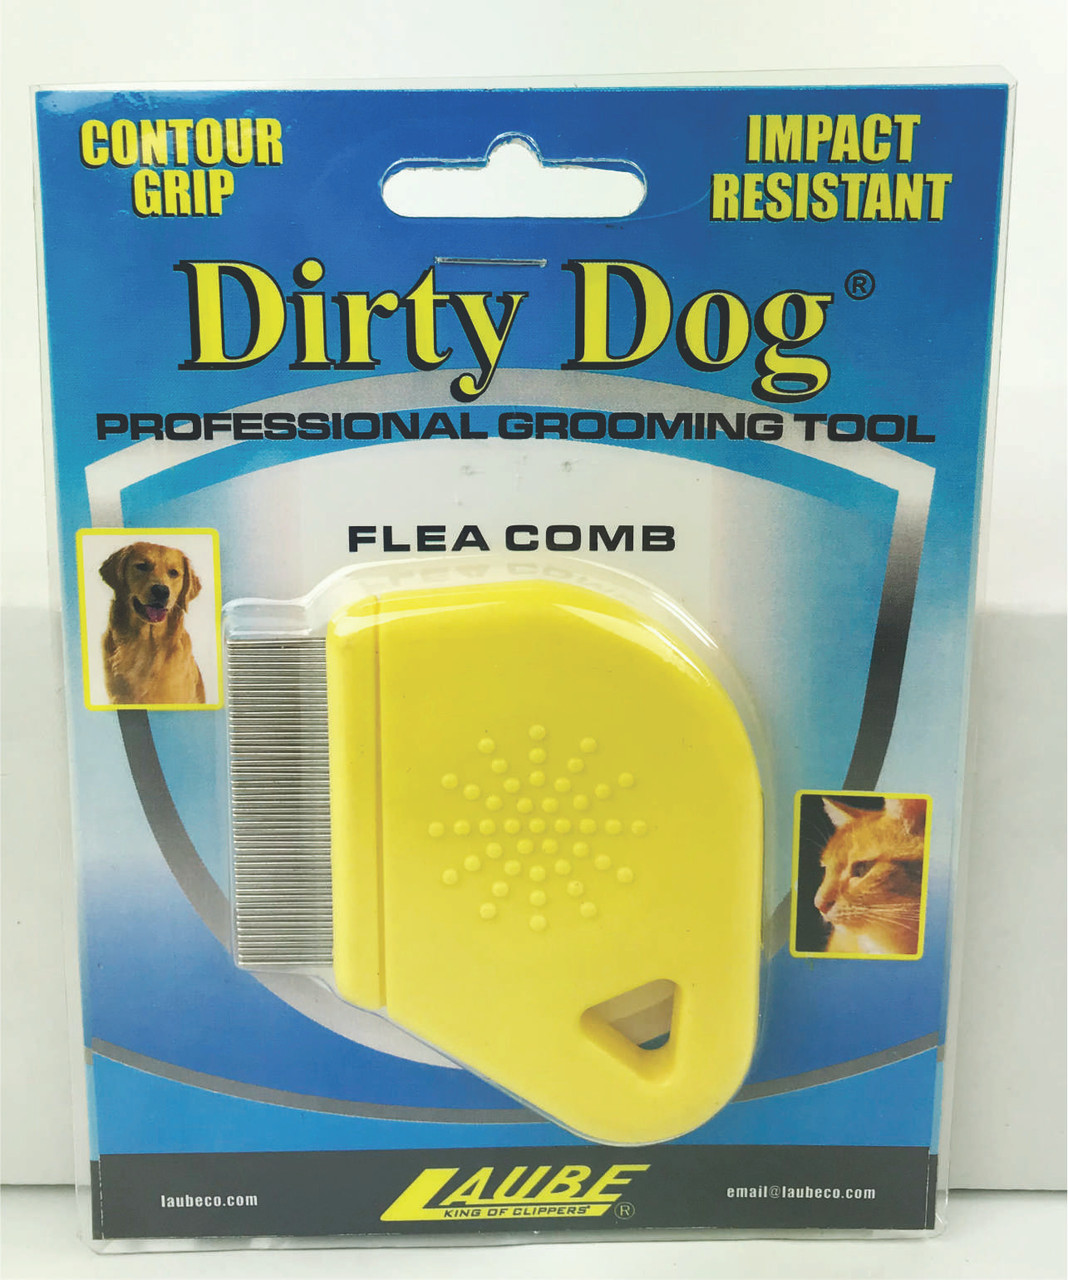 DIRTY DOG® Flea Comb with thumb grip